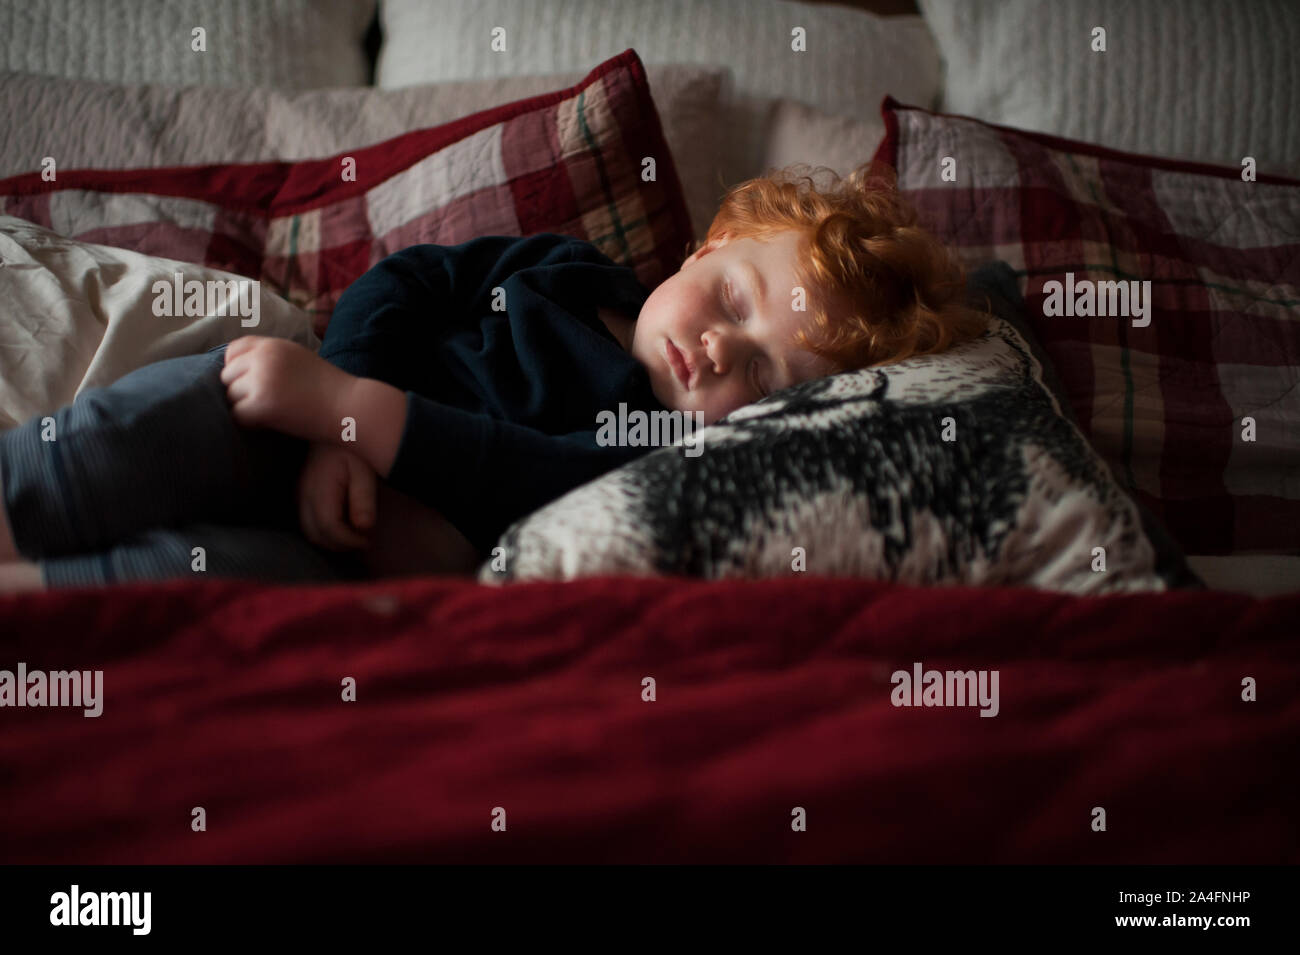 Toddler boy 1-2 years old asleep on pillows in bed with red bedding Stock Photo